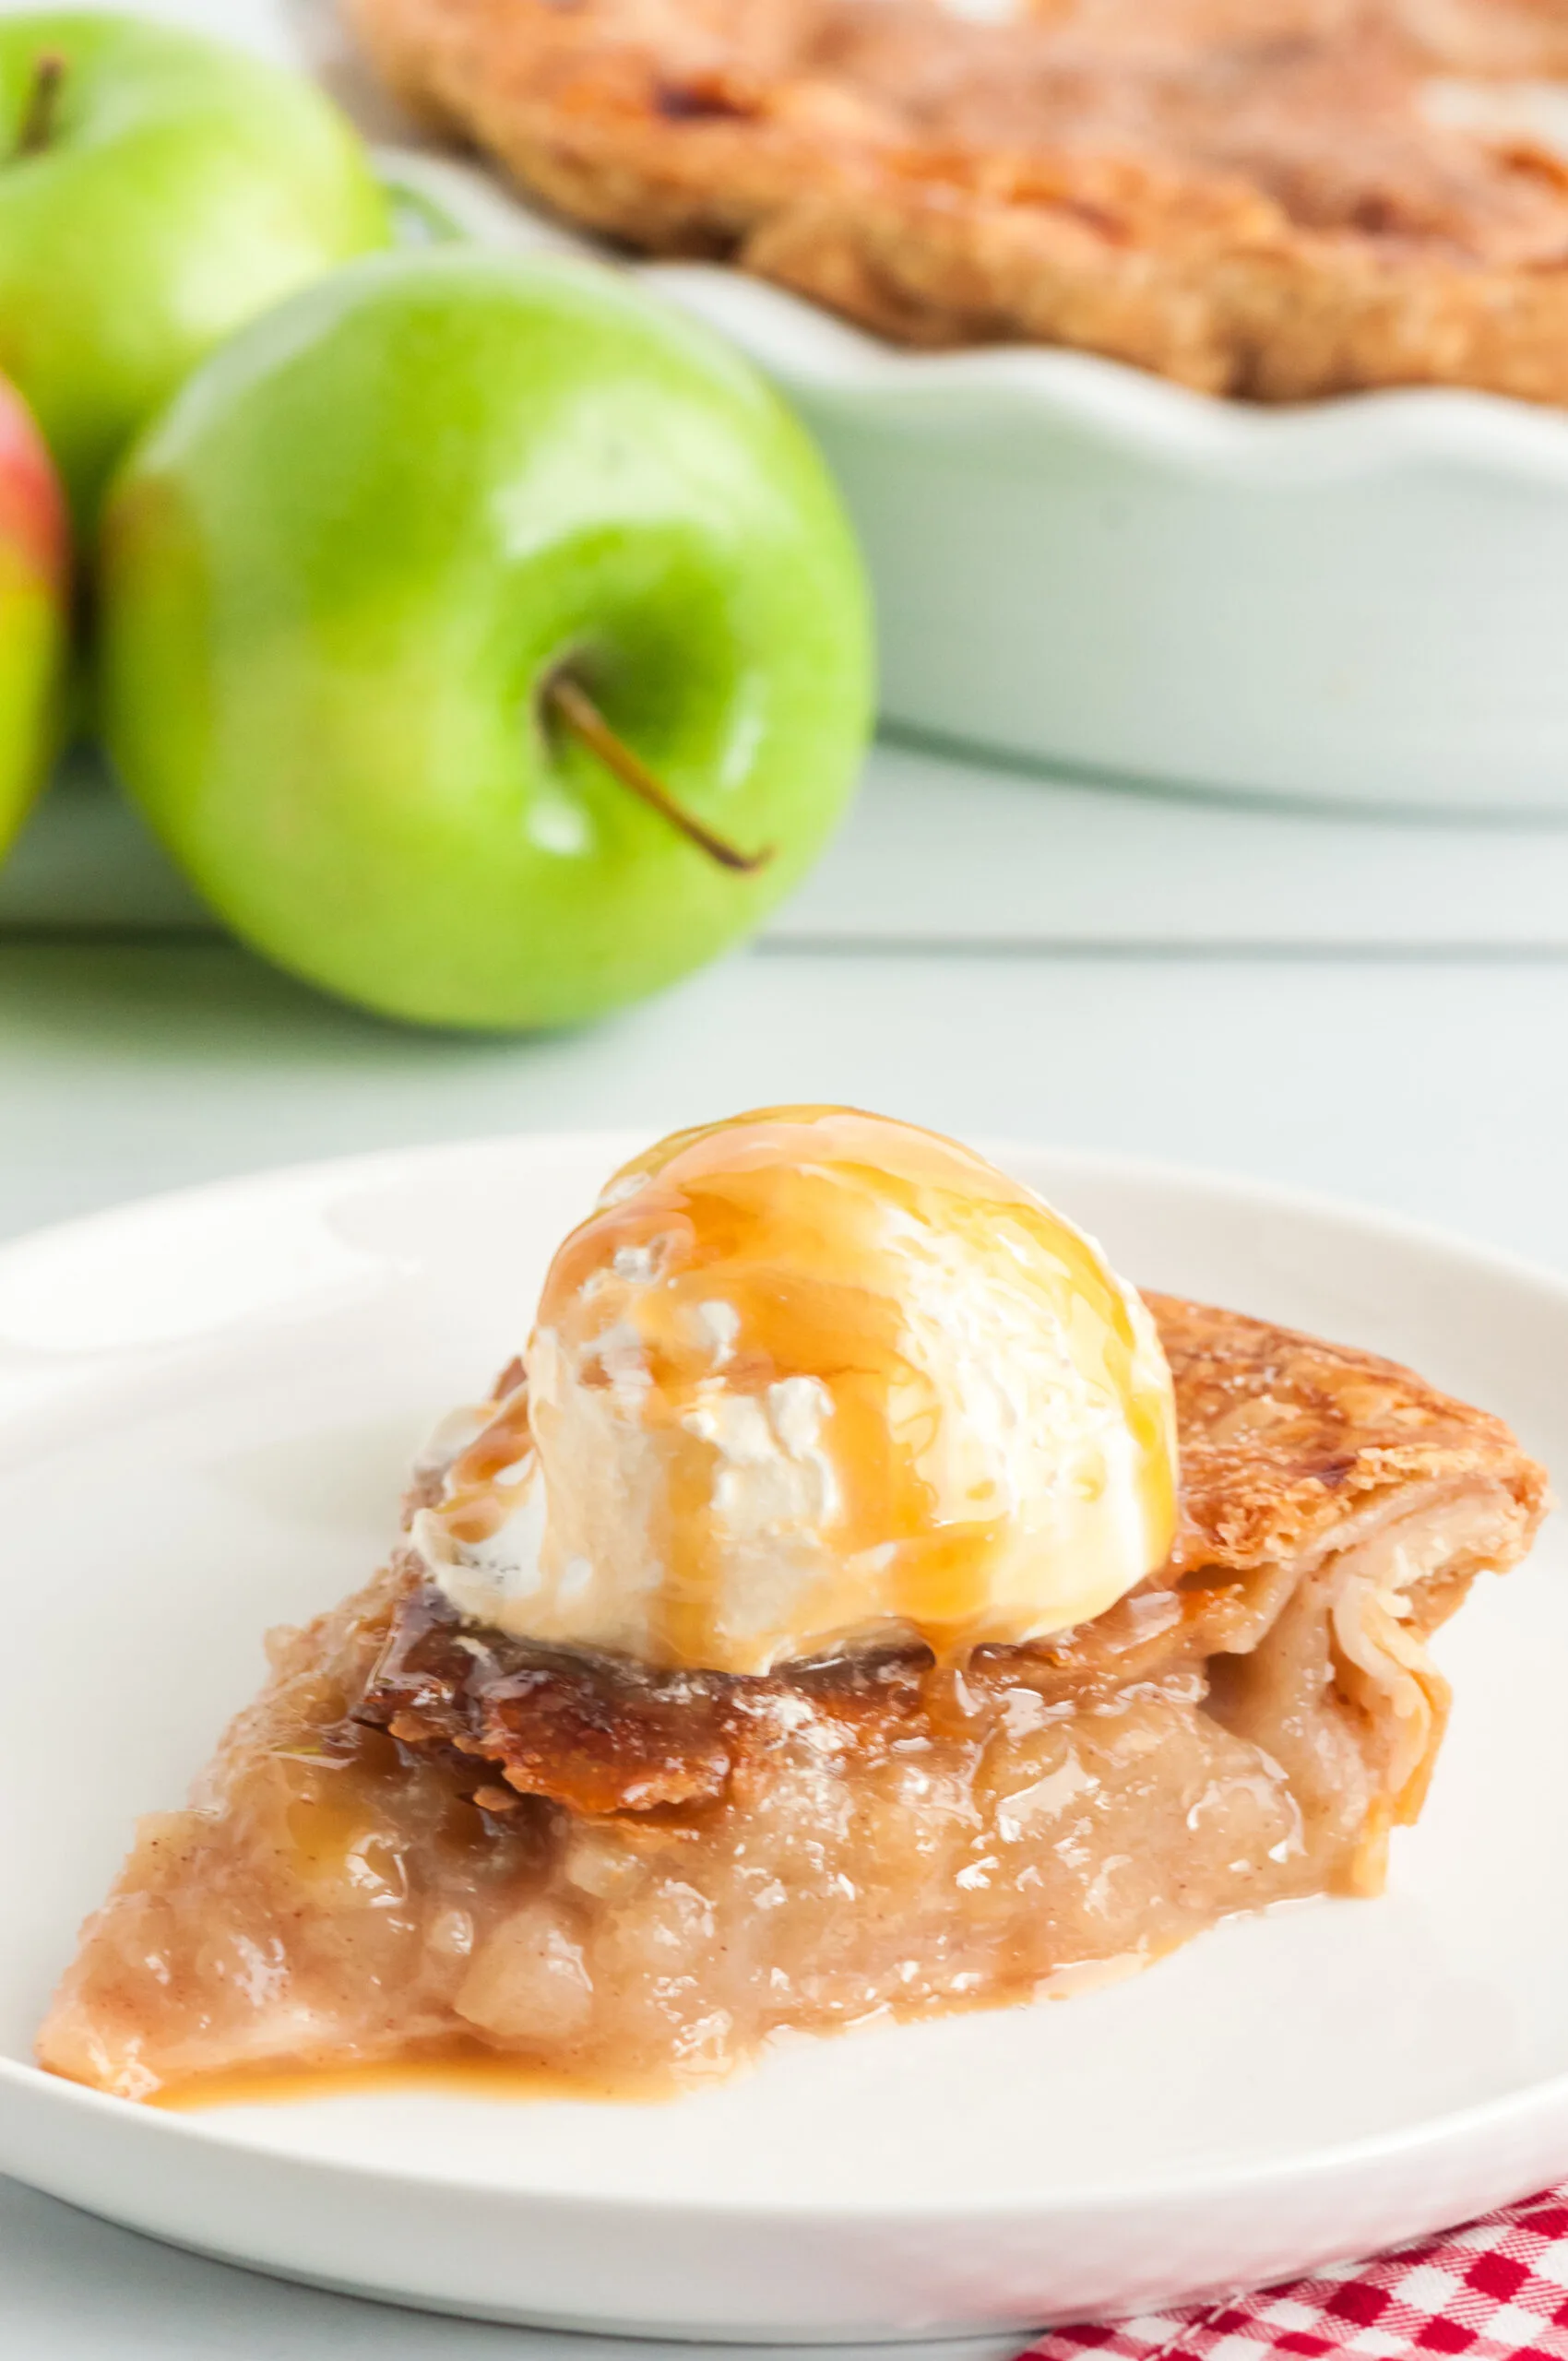 single slice of hot apple pie with ice cream and caramel drizzle on top. fresh apples in background.